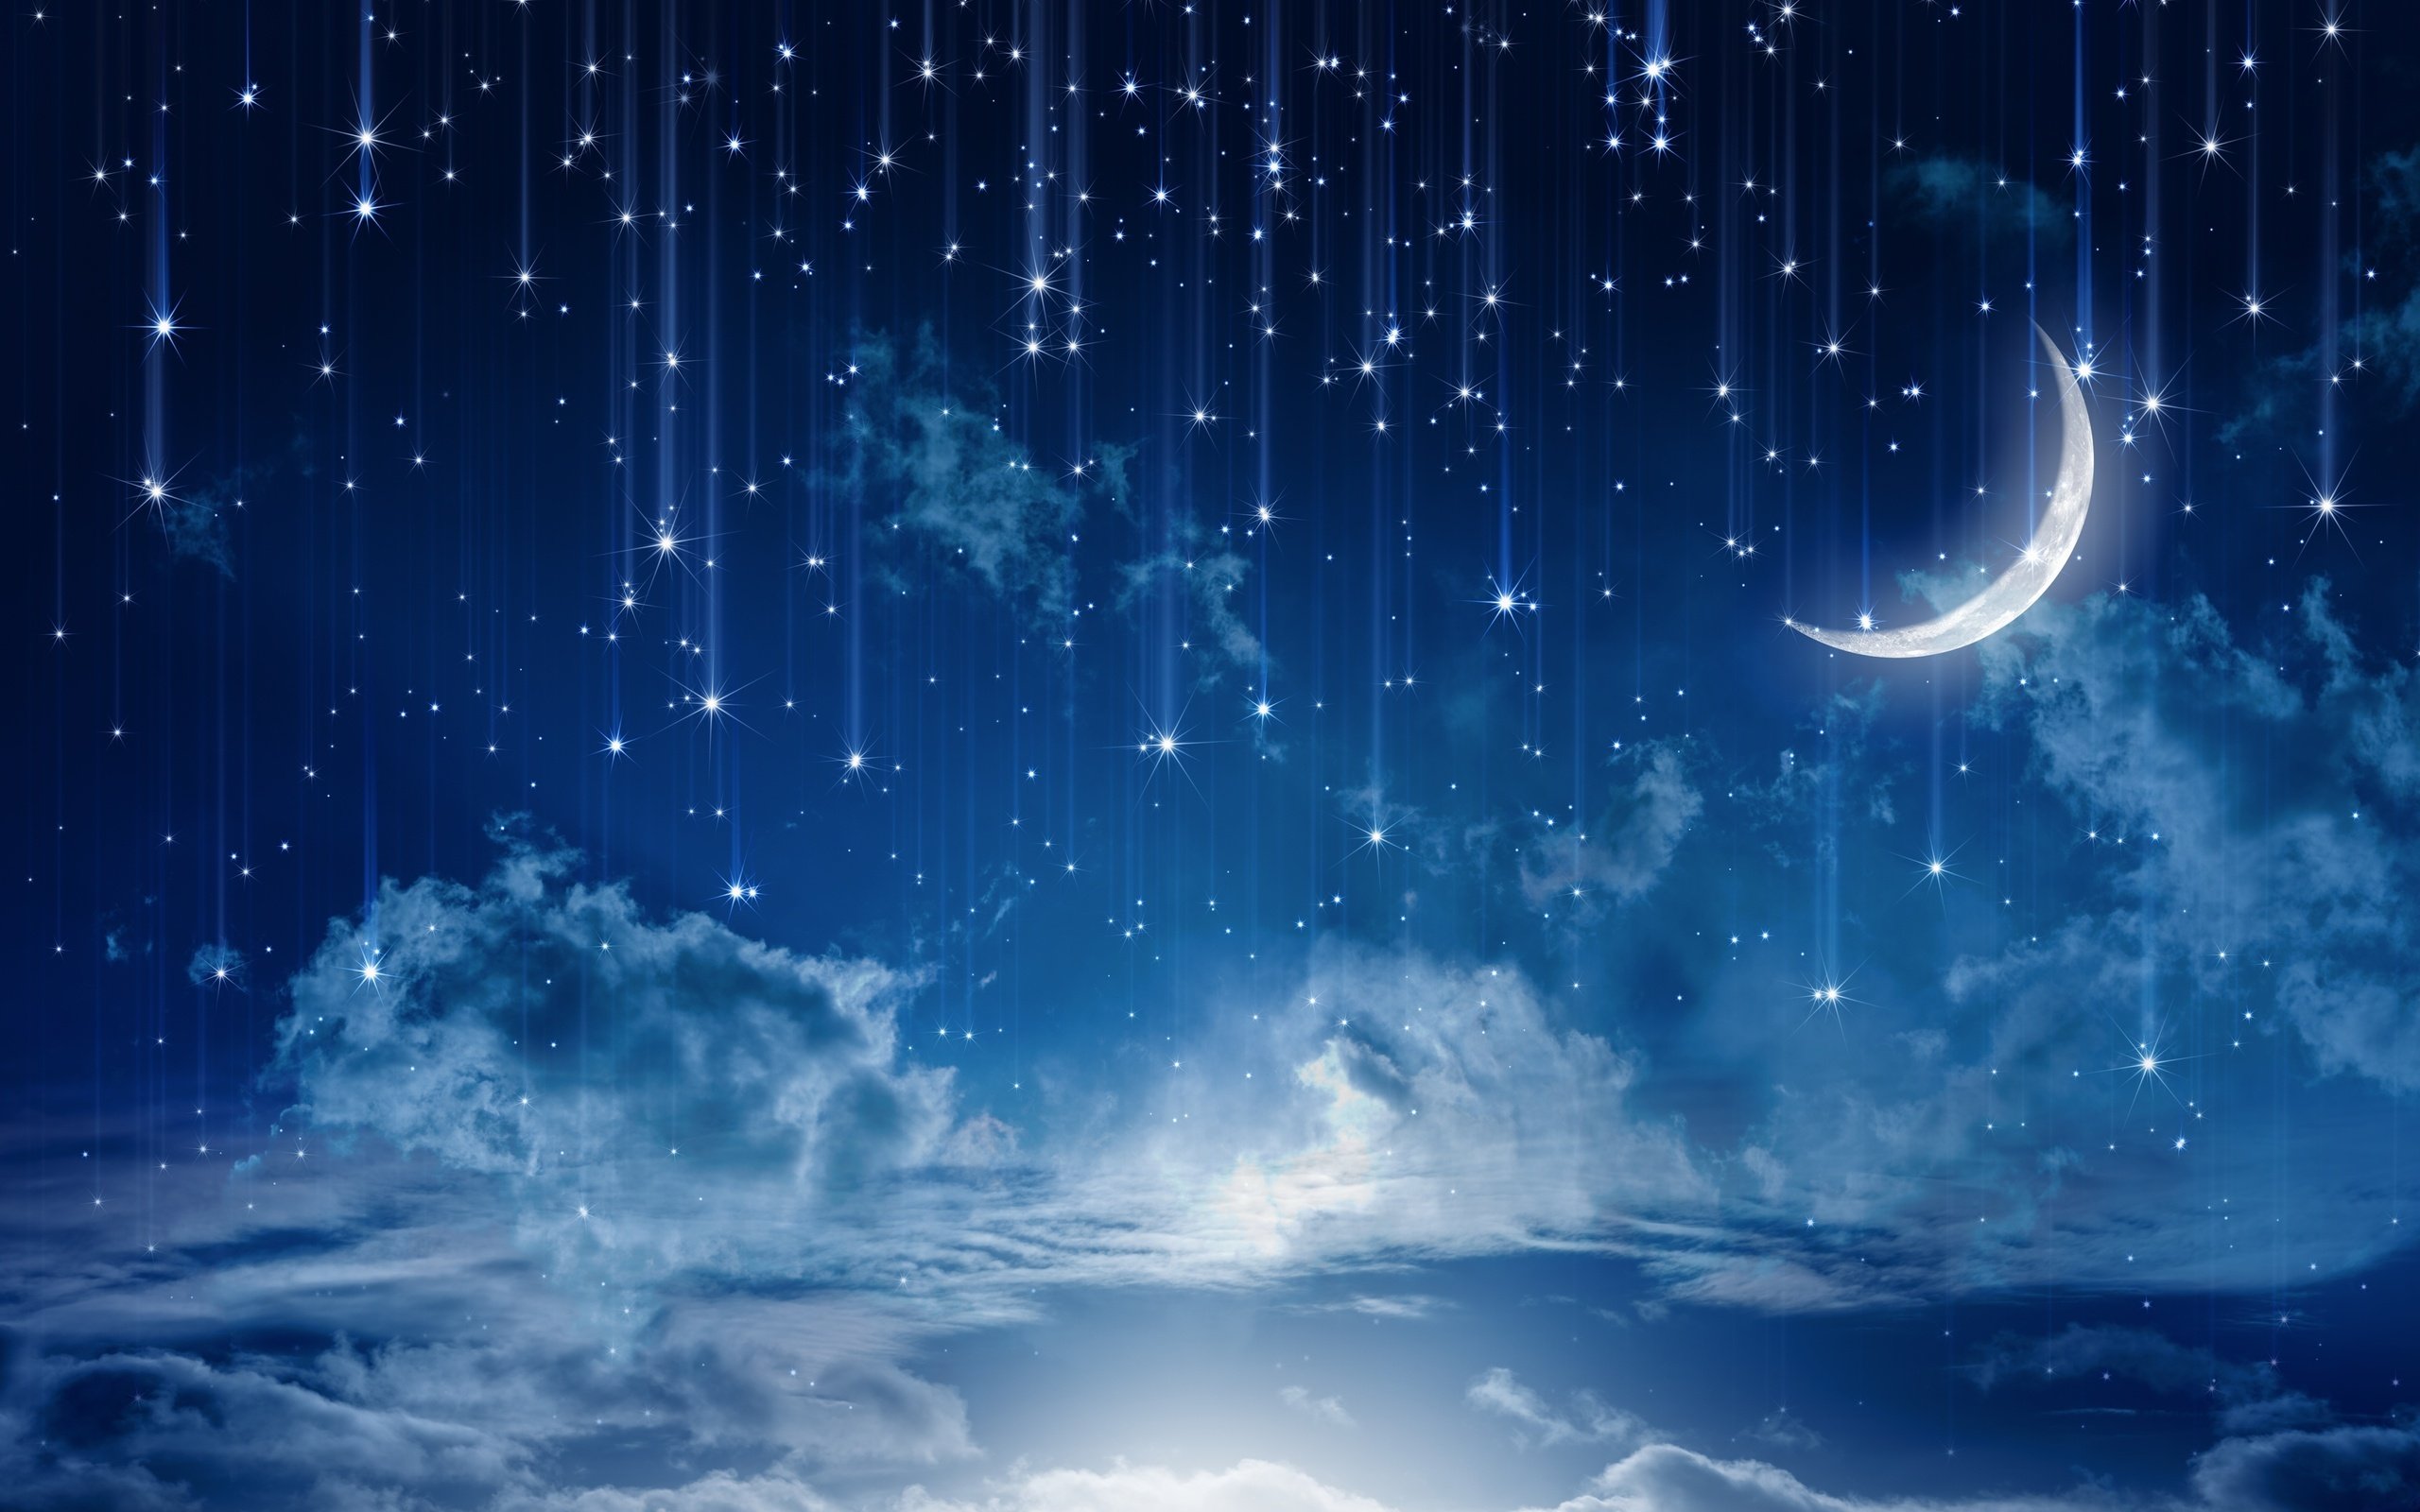 Free download sky moonlight nature night stars clouds rain landscape moon wallpaper [2560x1600] for your Desktop, Mobile & Tablet. Explore Night Sky Wallpaper HD. Night Sky Wallpaper for Computer